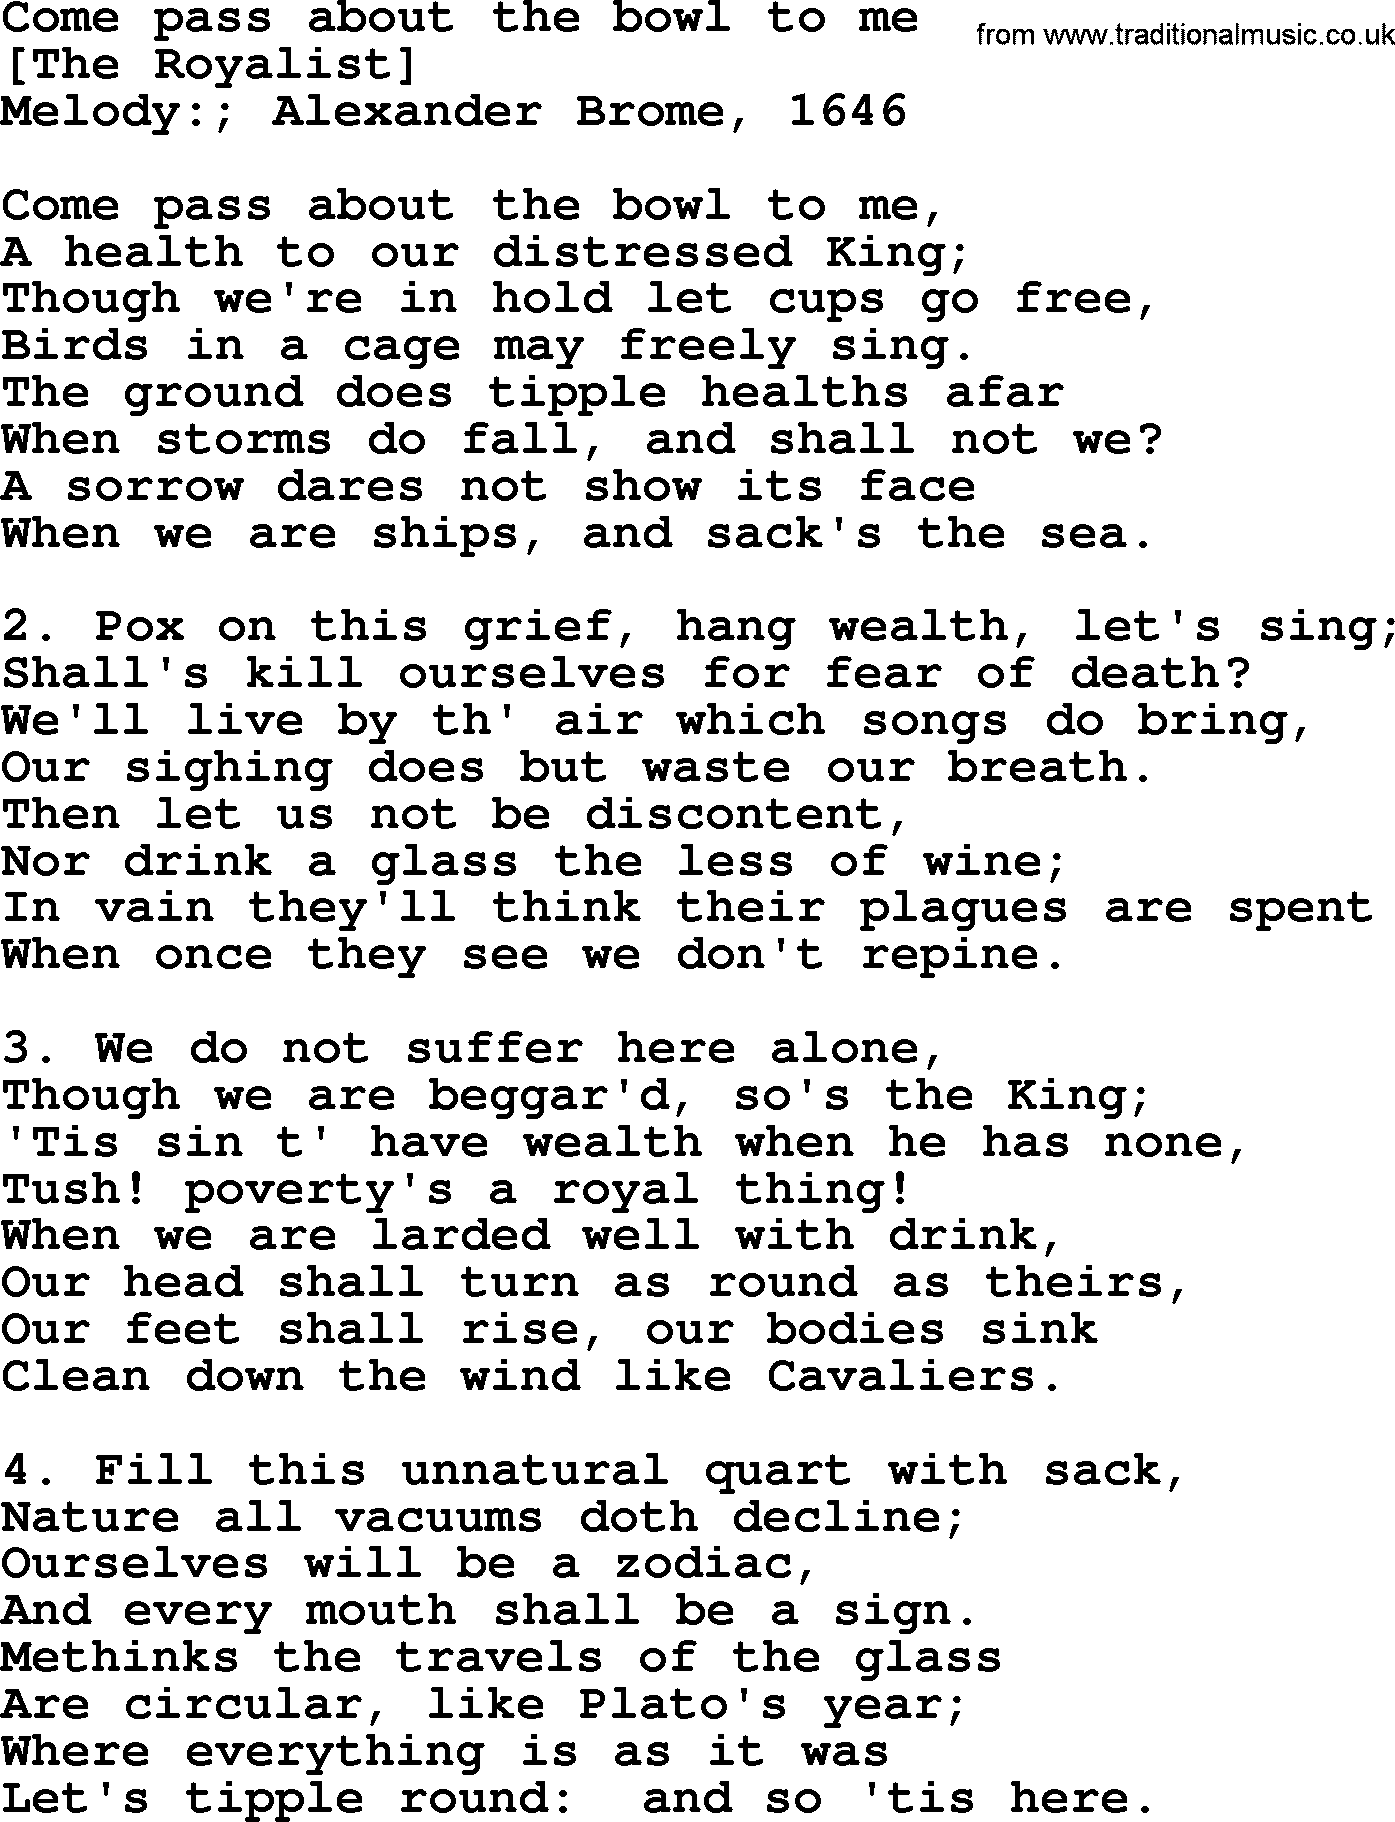 Old English Song: Come Pass About The Bowl To Me lyrics